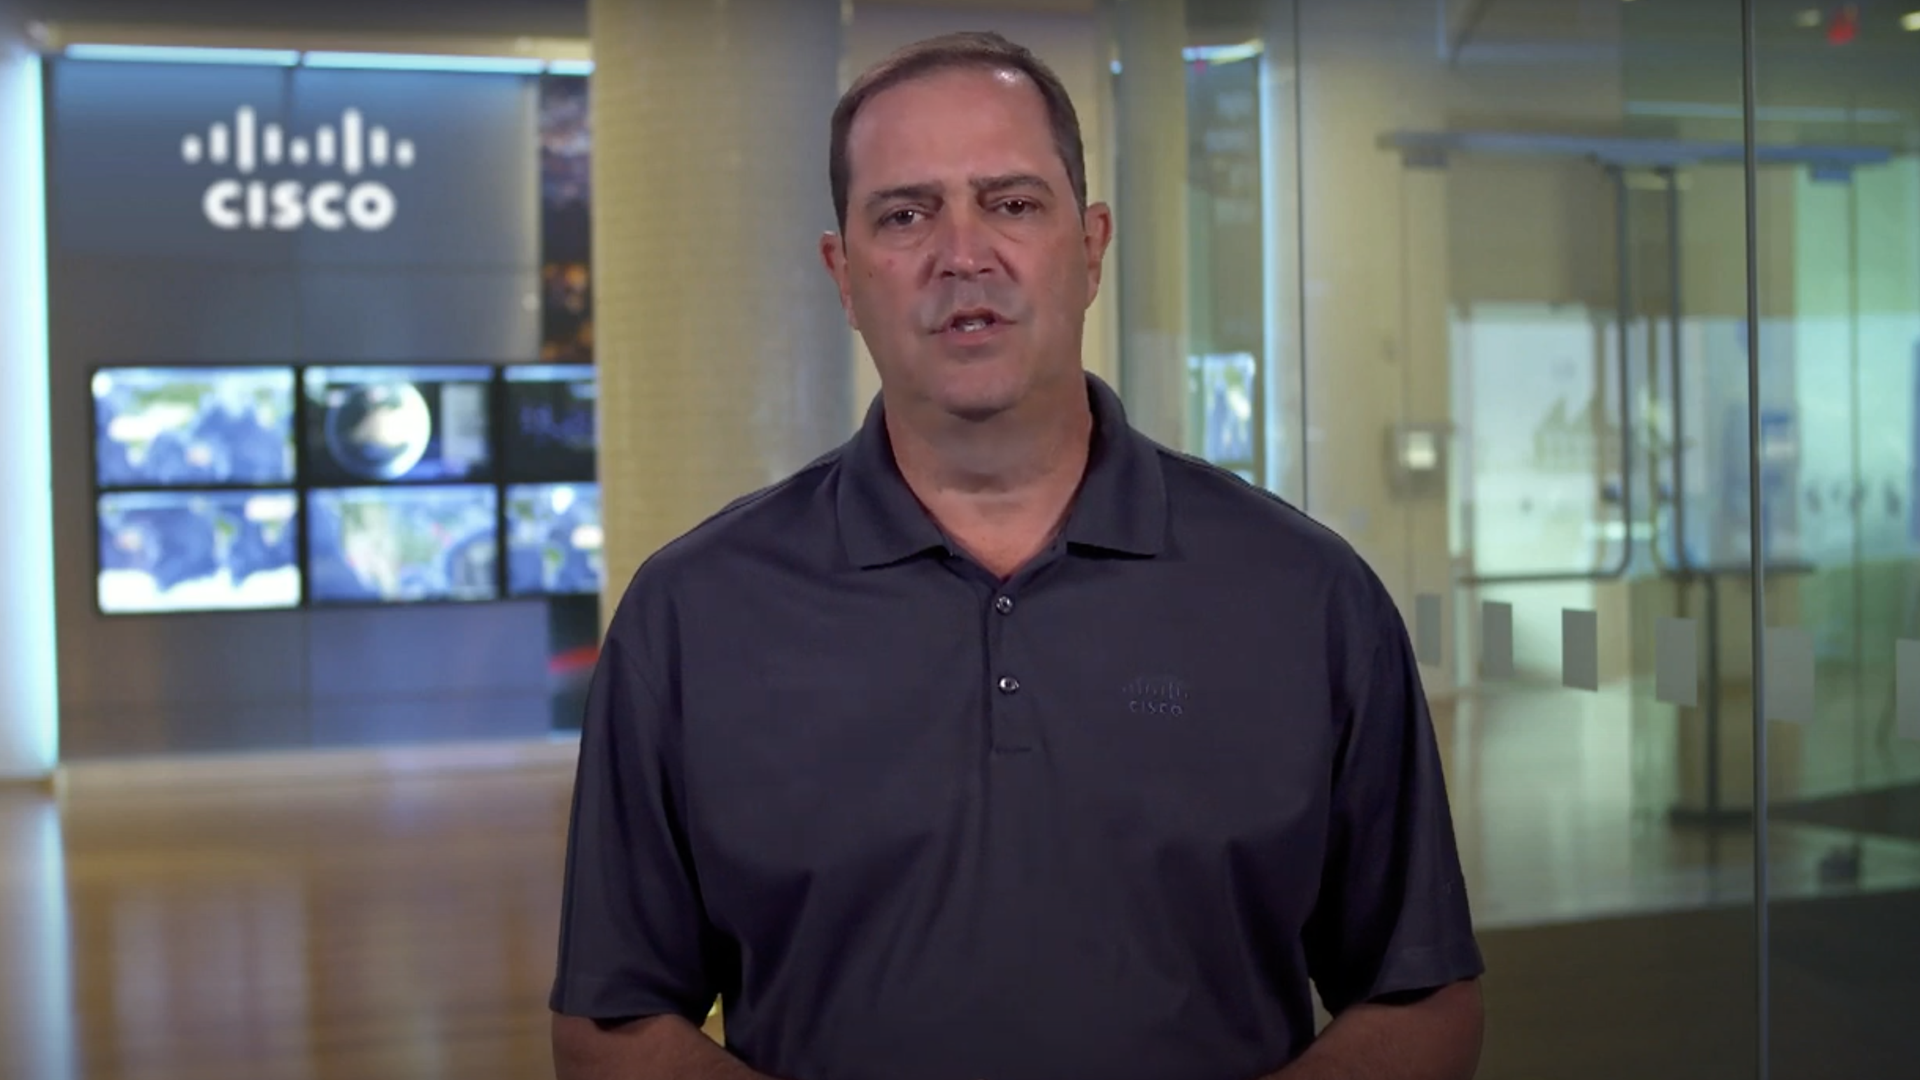 Cisco CEO Chuck Robbins, announcing the postponement of Cisco Live in a YouTube video